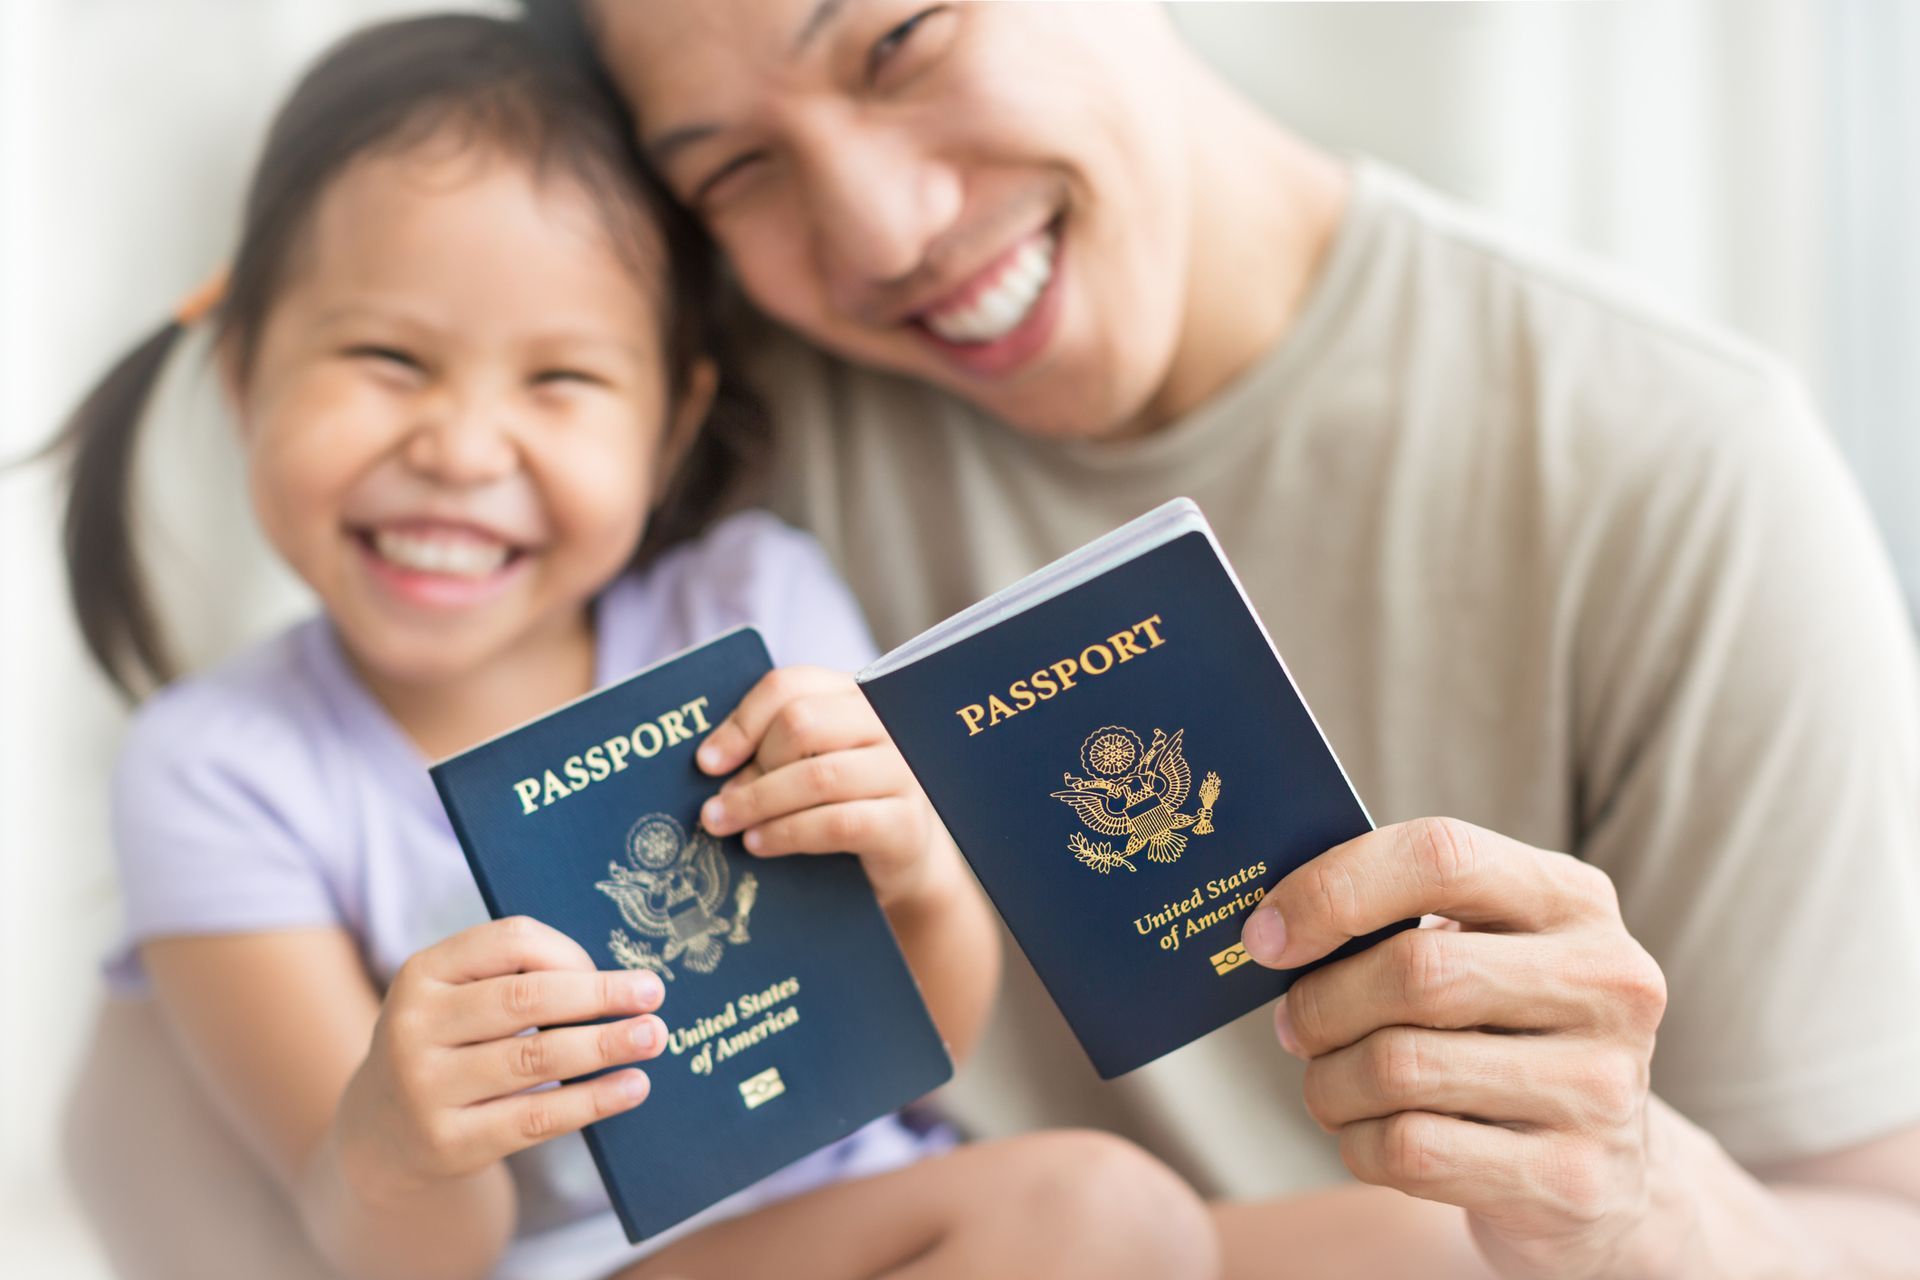 A man and a little girl are holding two passports.